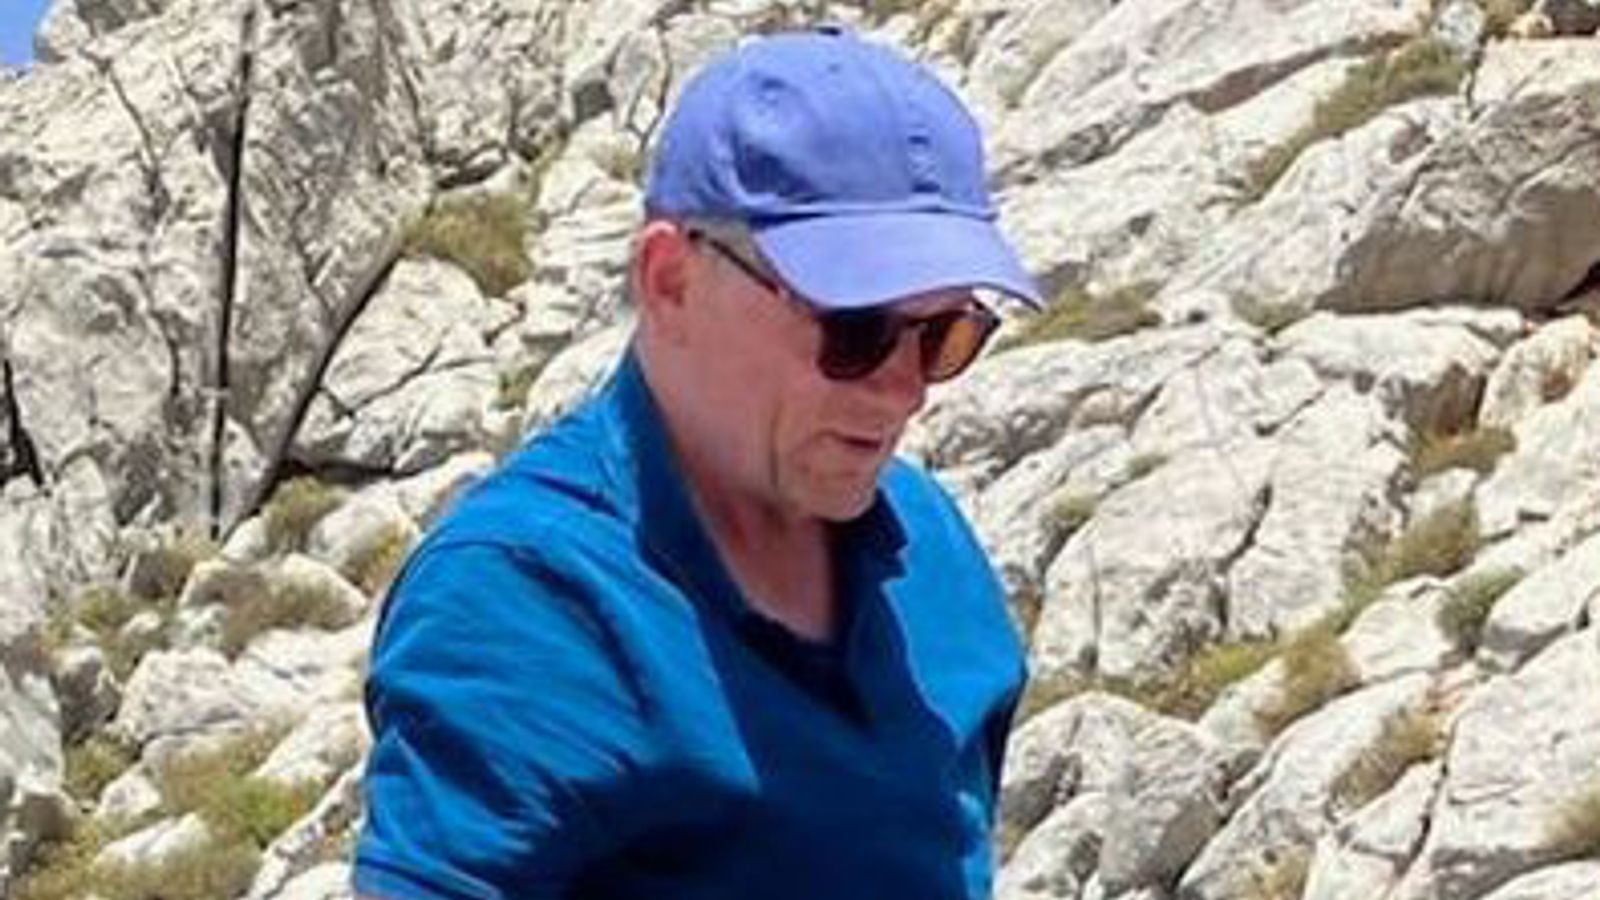 Dr Michael Mosley: After a painstaking four-day search, TV doctor's body was found just metres from safety at beach resort